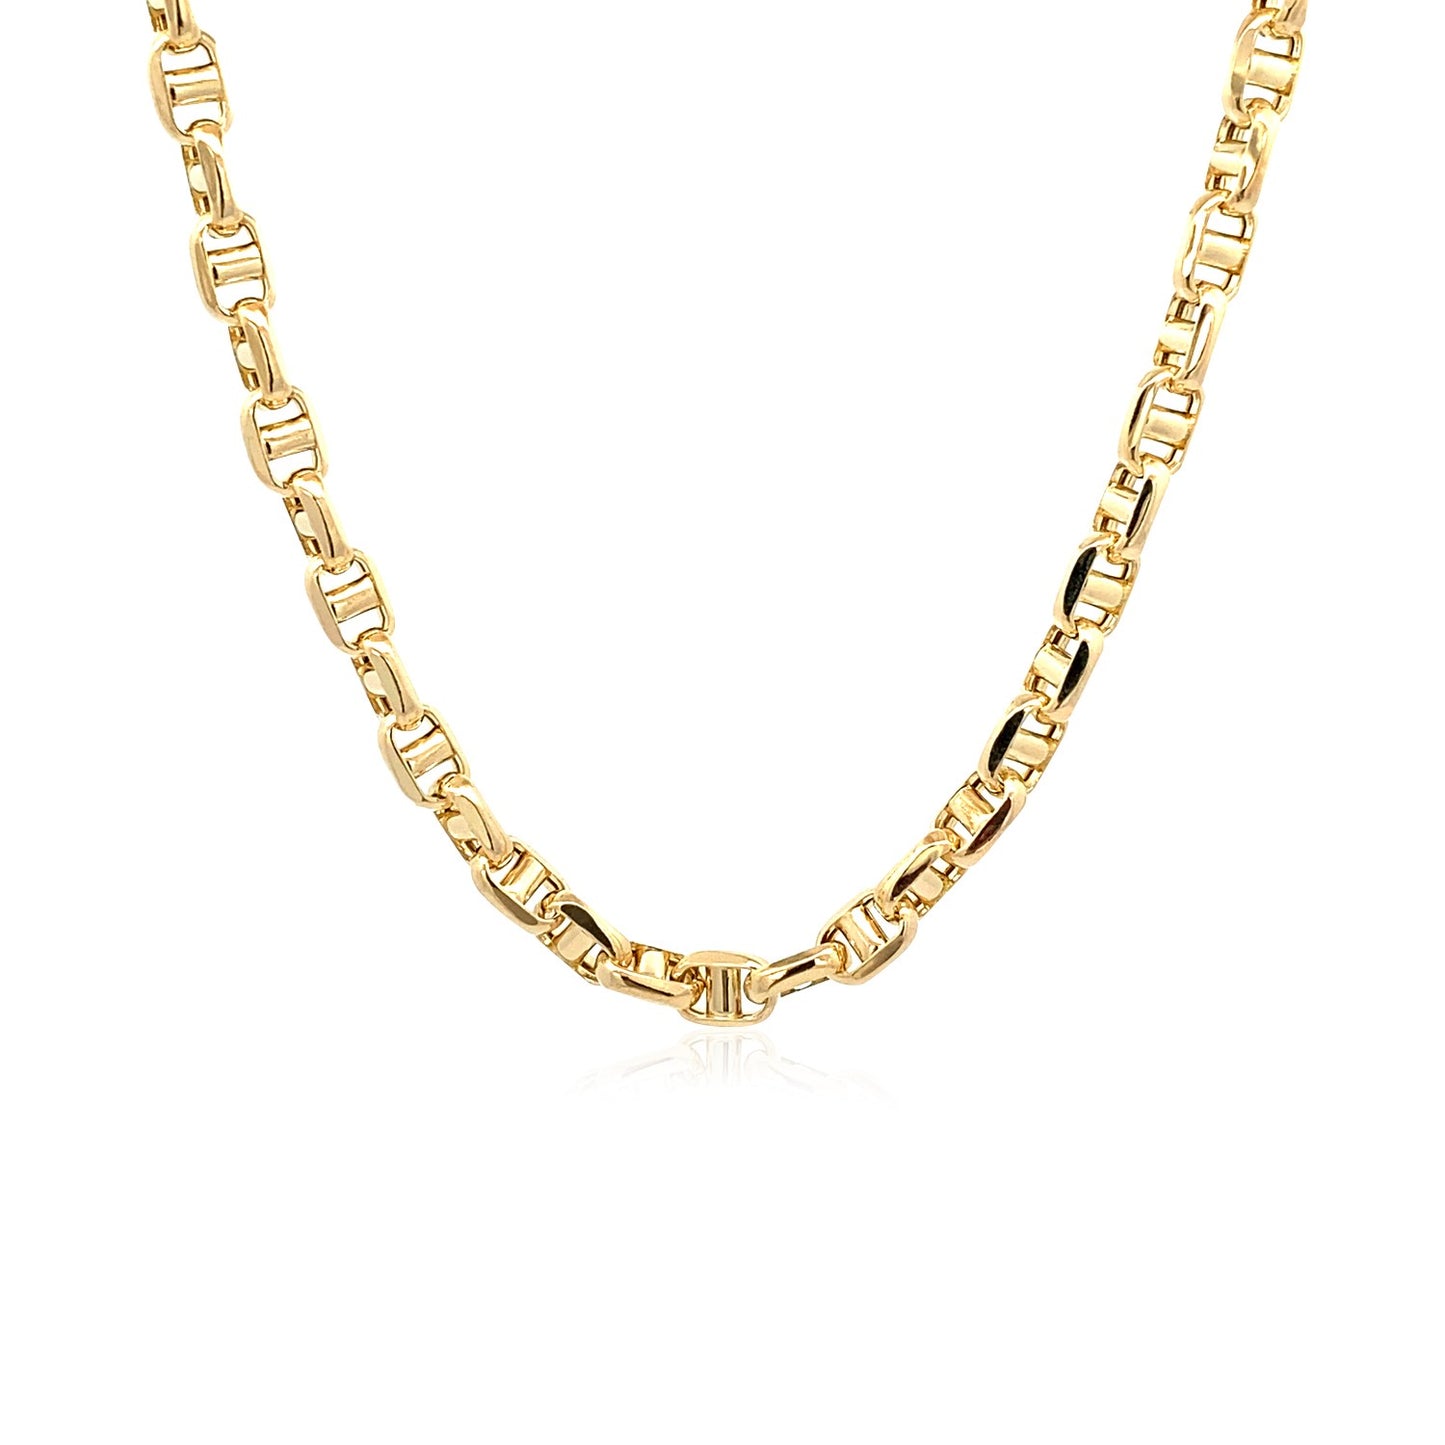 4.5mm 14k Yellow Gold Anchor Chain